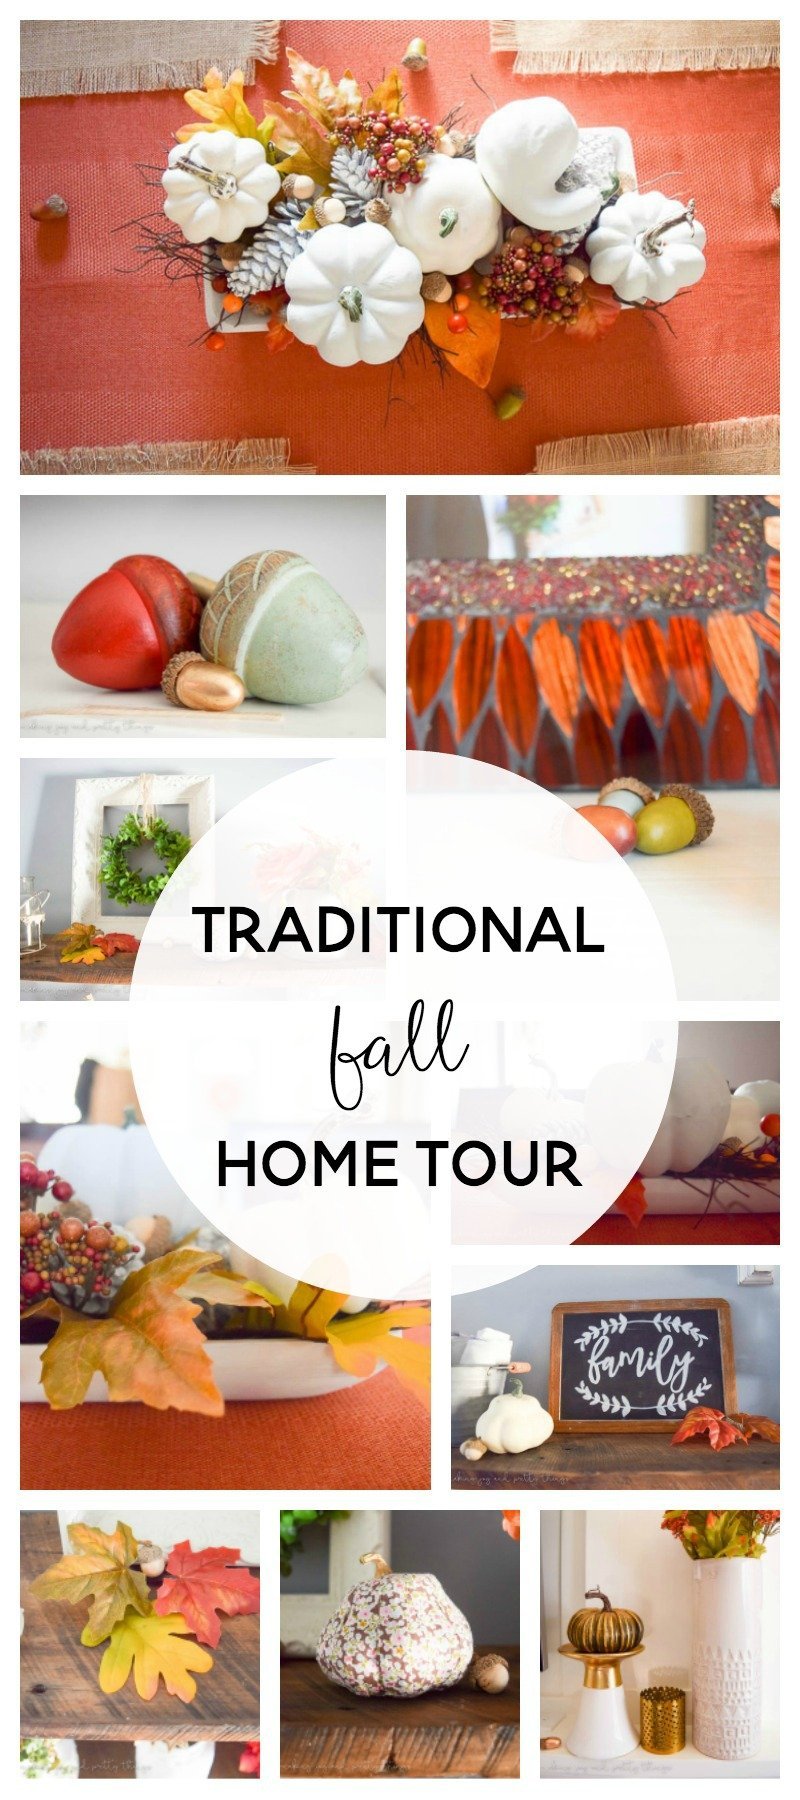 A collage of images shows different pieces of traditional fall home decor. A large white circle in the center reads "traditional fall home tour" 